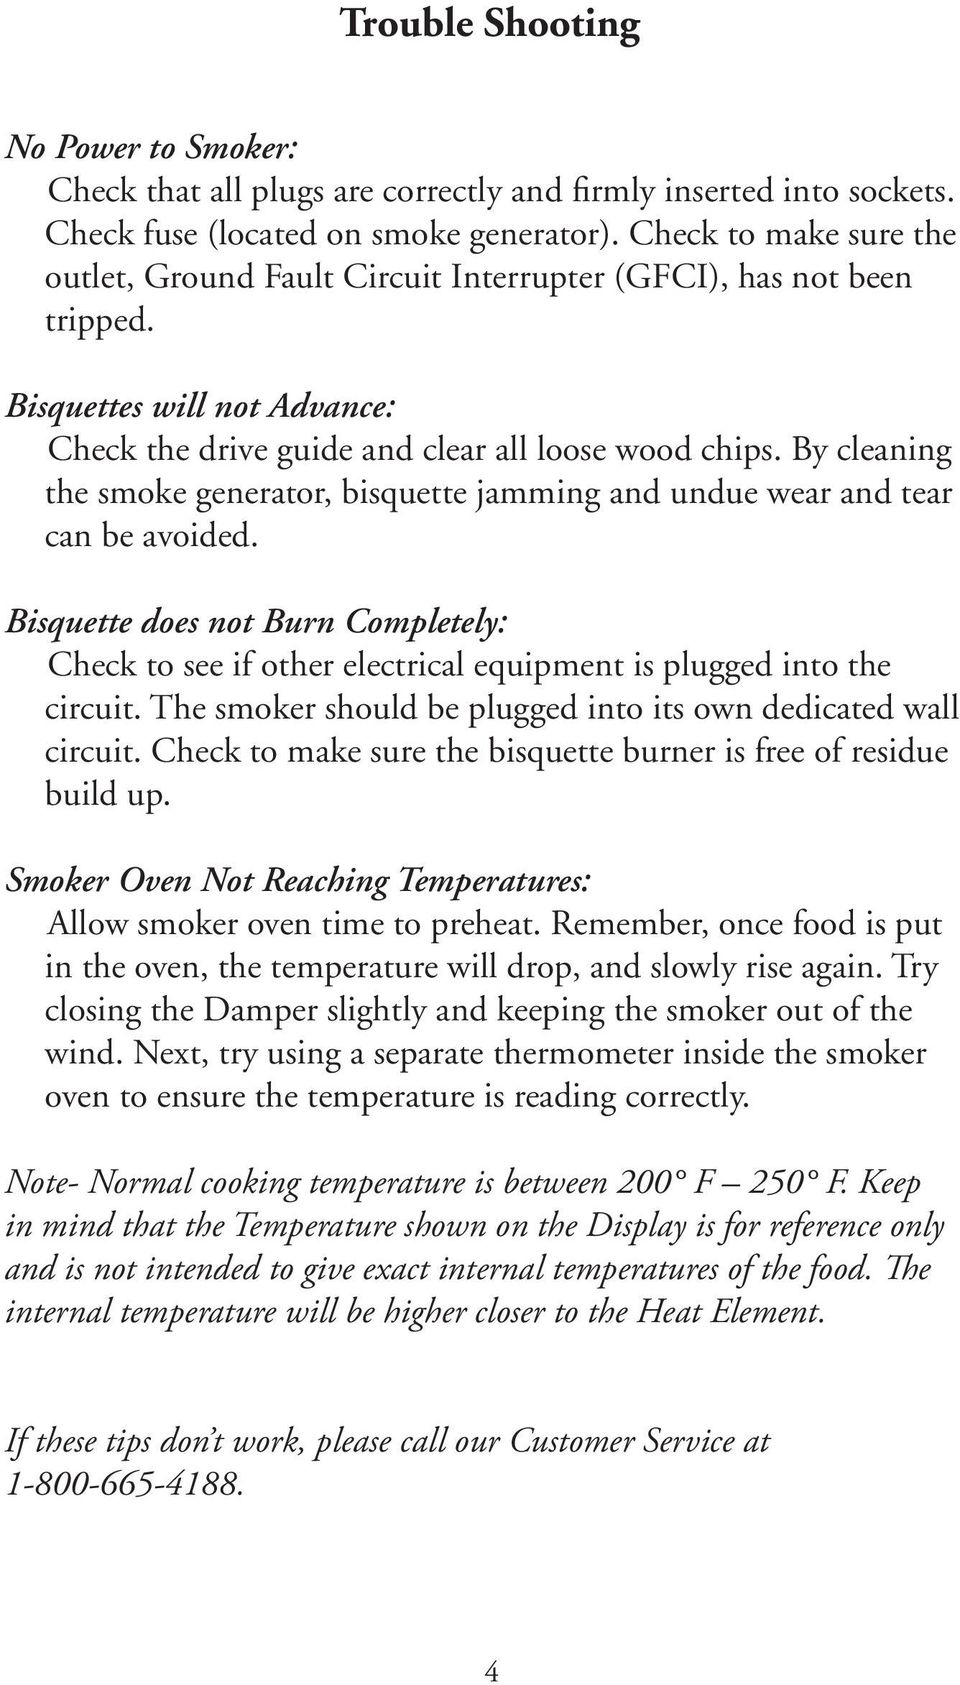 By cleaning the smoke generator, bisquette jamming and undue wear and tear can be avoided. Bisquette does not Burn Completely: Check to see if other electrical equipment is plugged into the circuit.